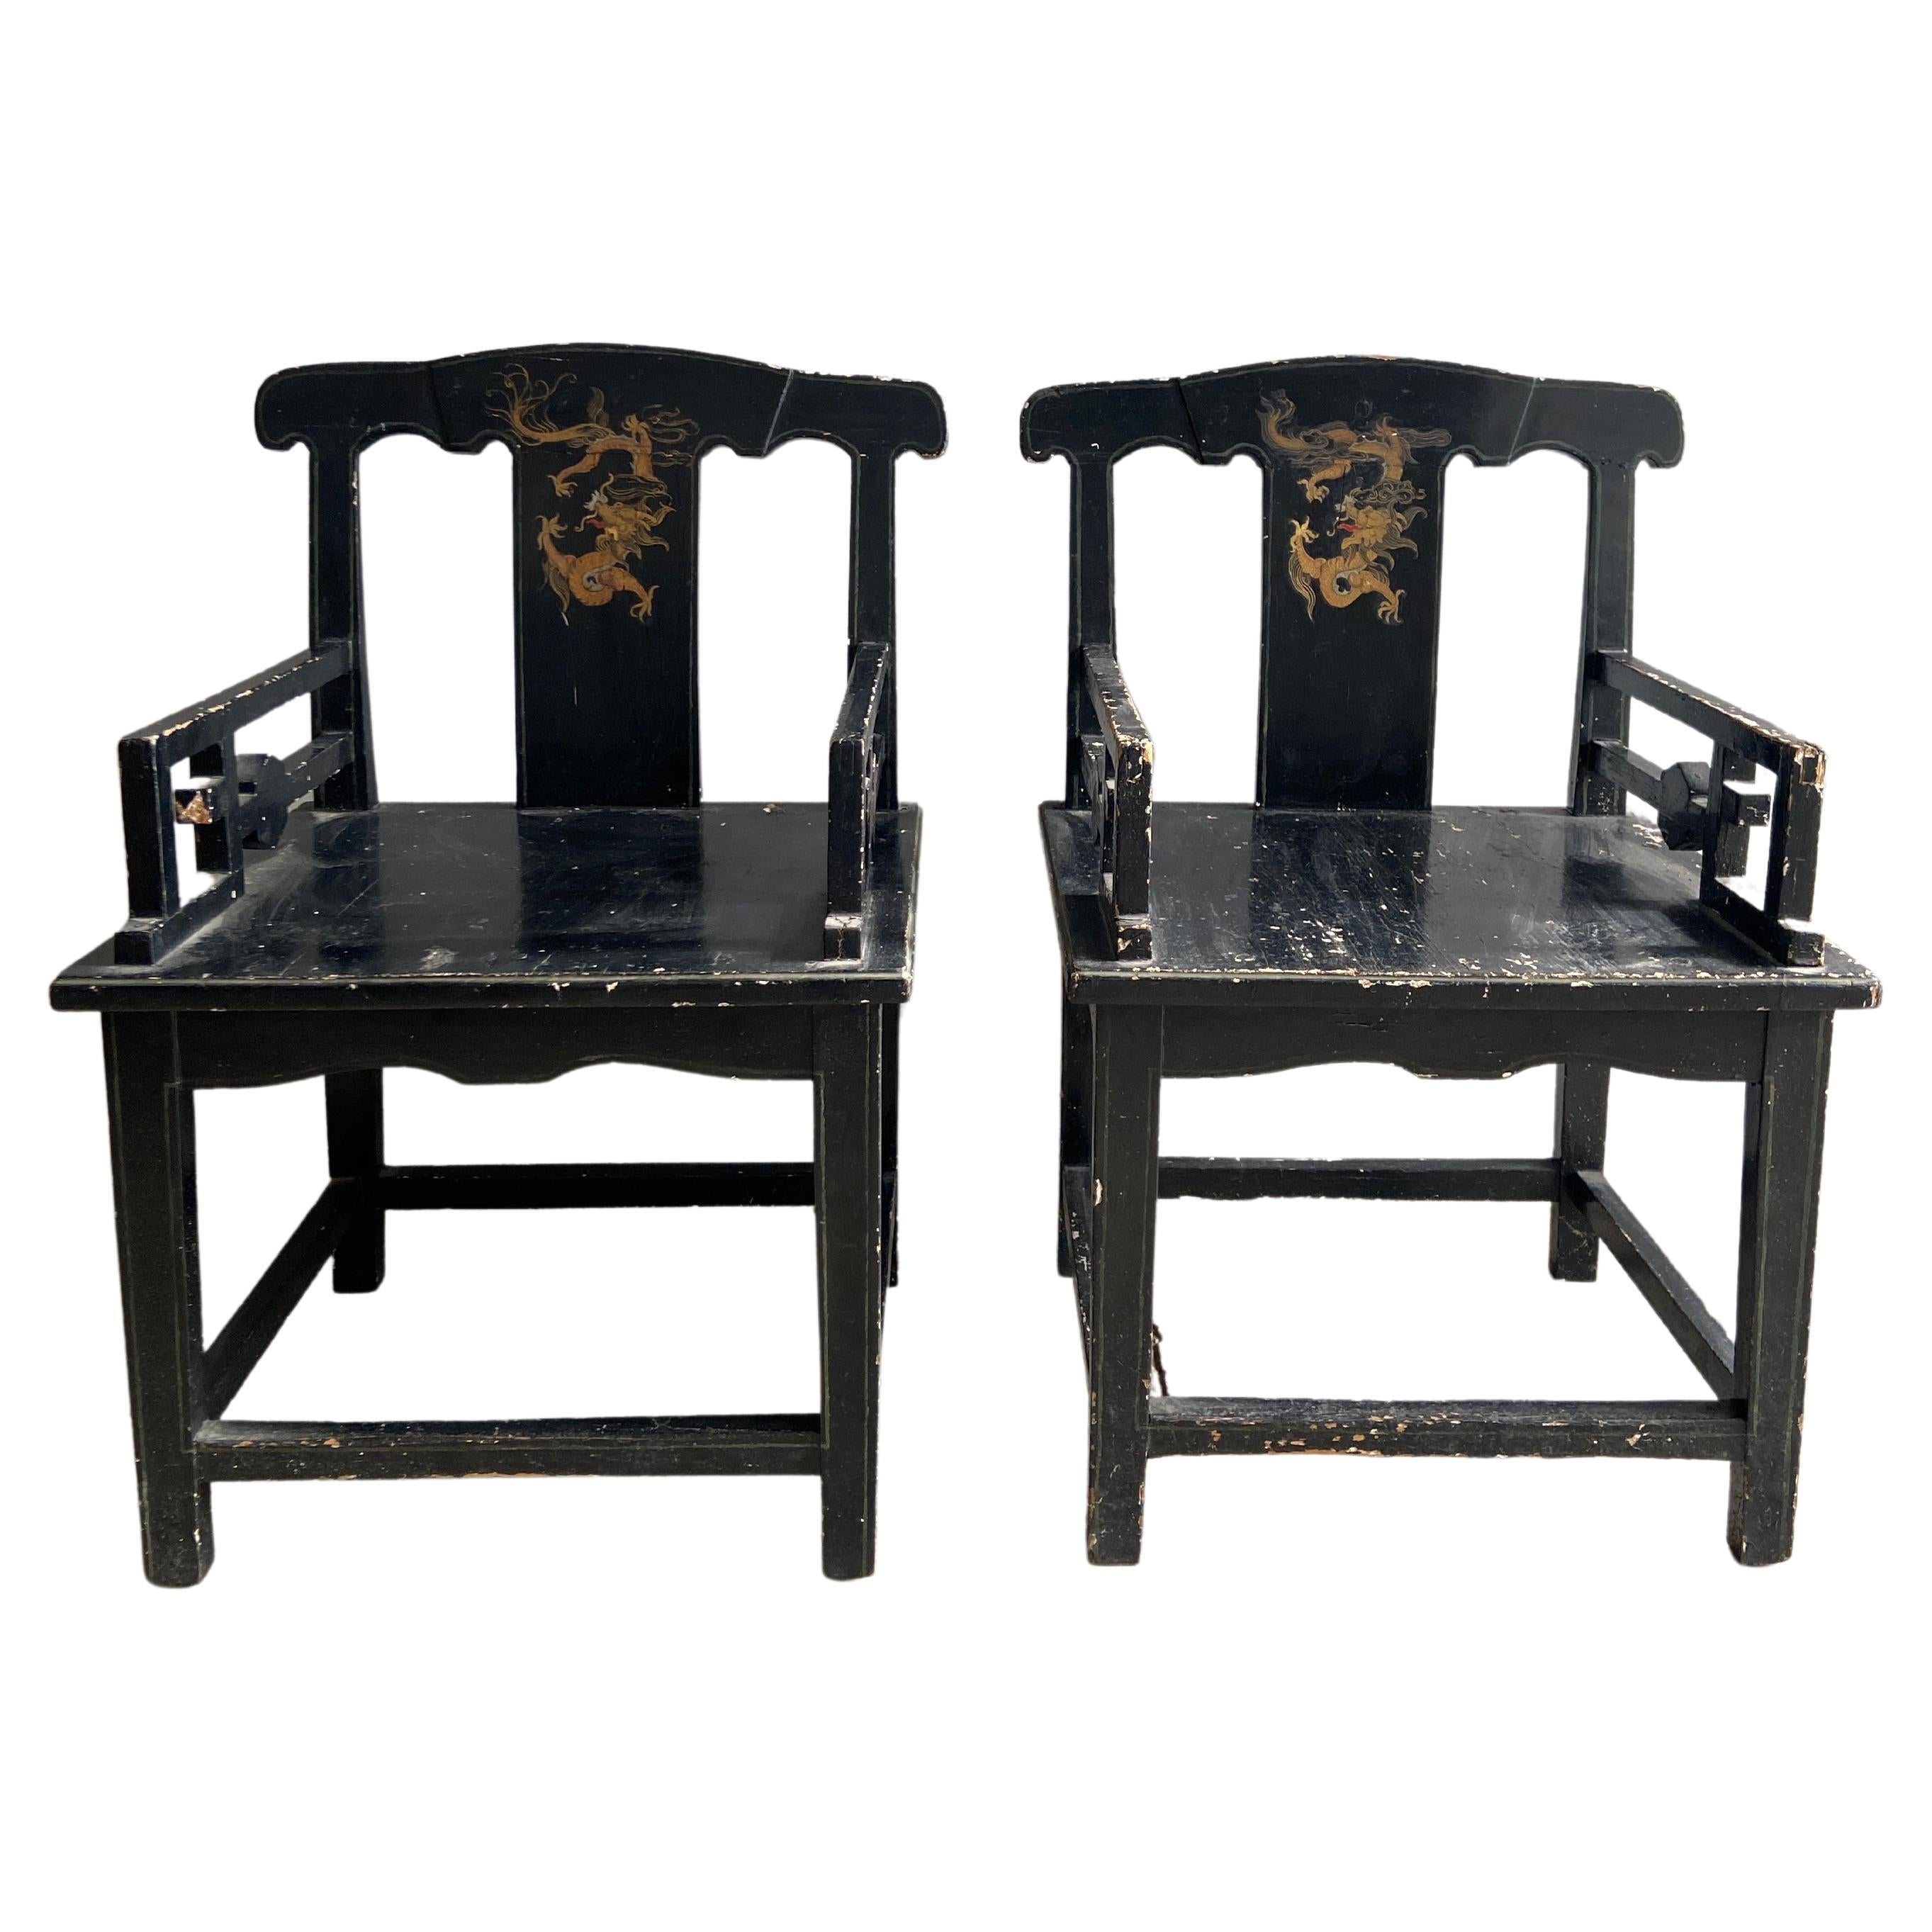 Pair of Chinese Chair in Lacquered Black Wood and Gold from Late 19th Century For Sale